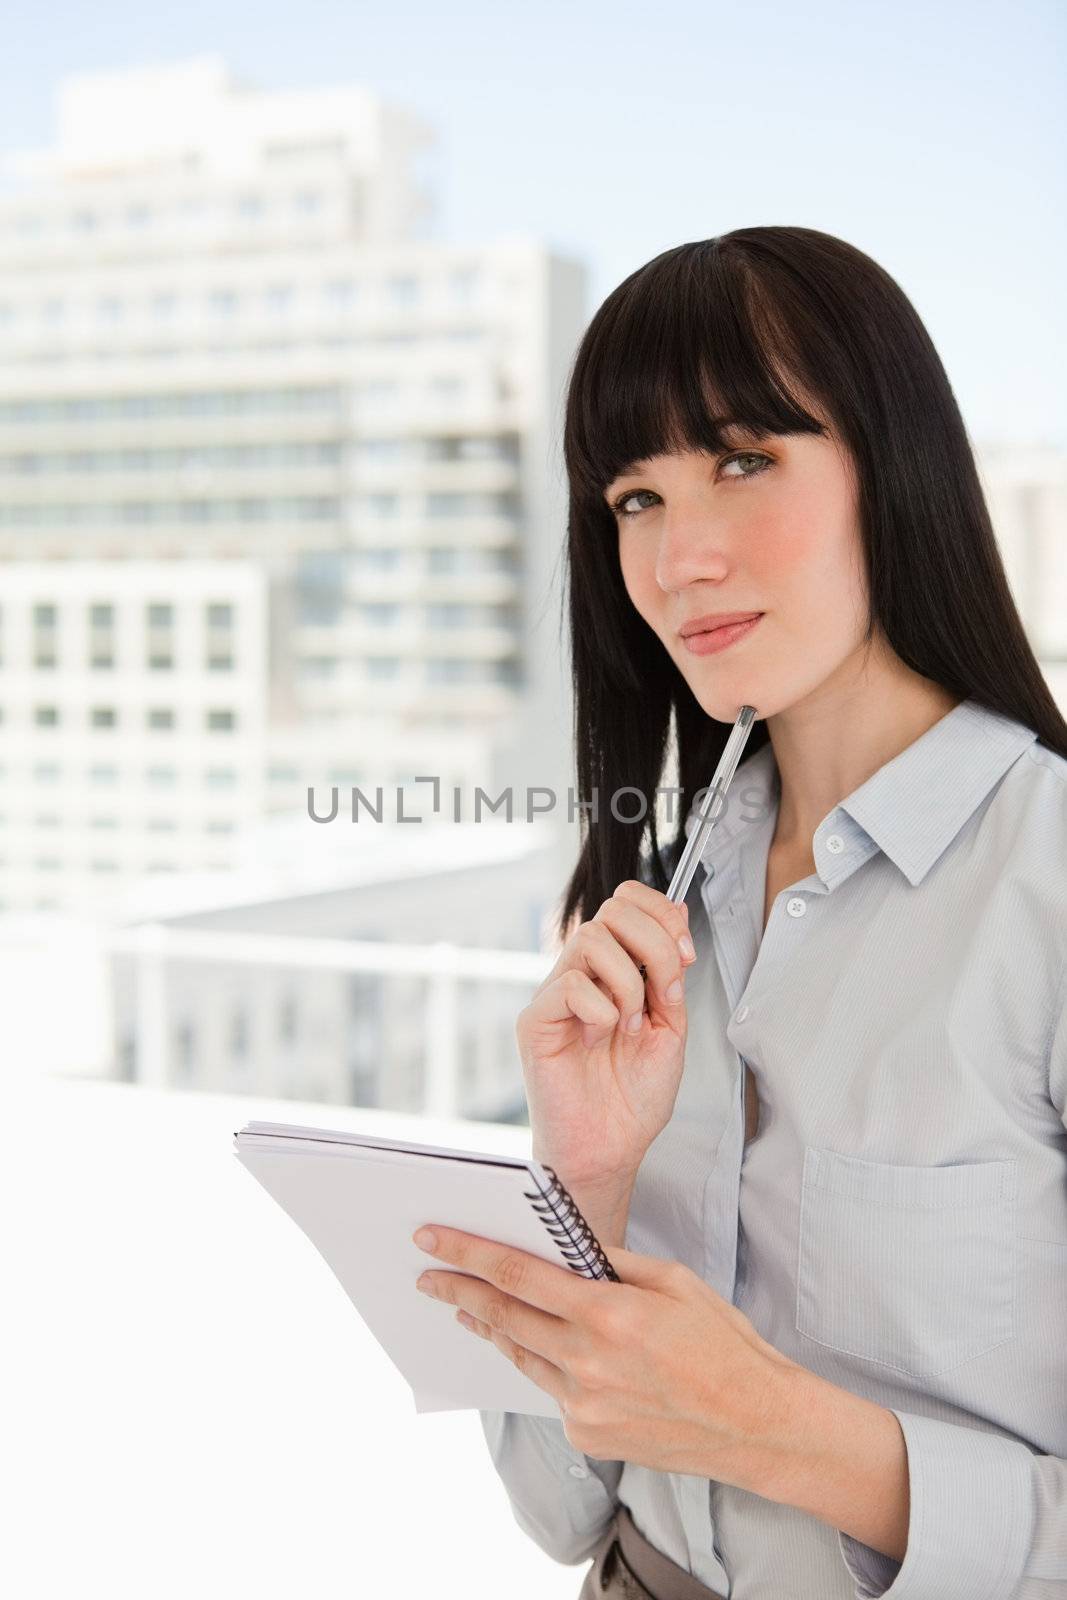 A woman with black hair looks ahead as she thinks with a notepad and pen in hand